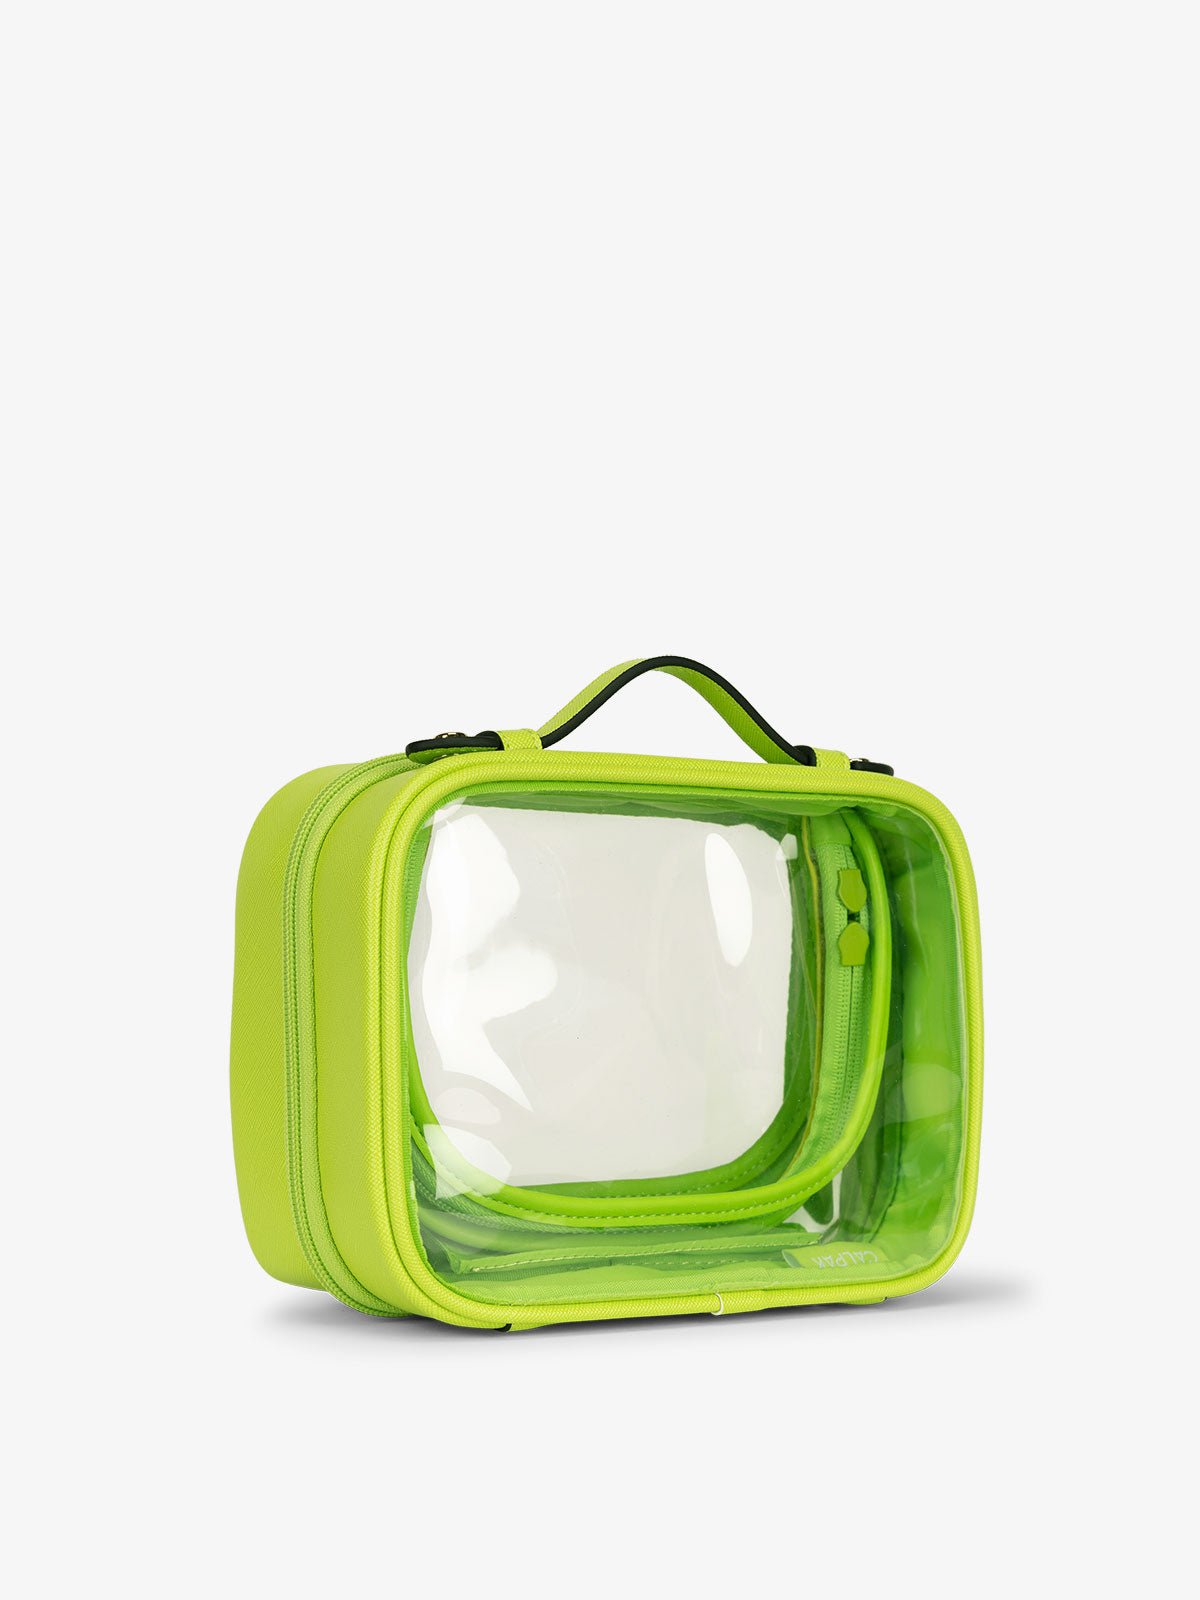 CALPAK small water resistant clear cosmetics case with sturdy handles in green